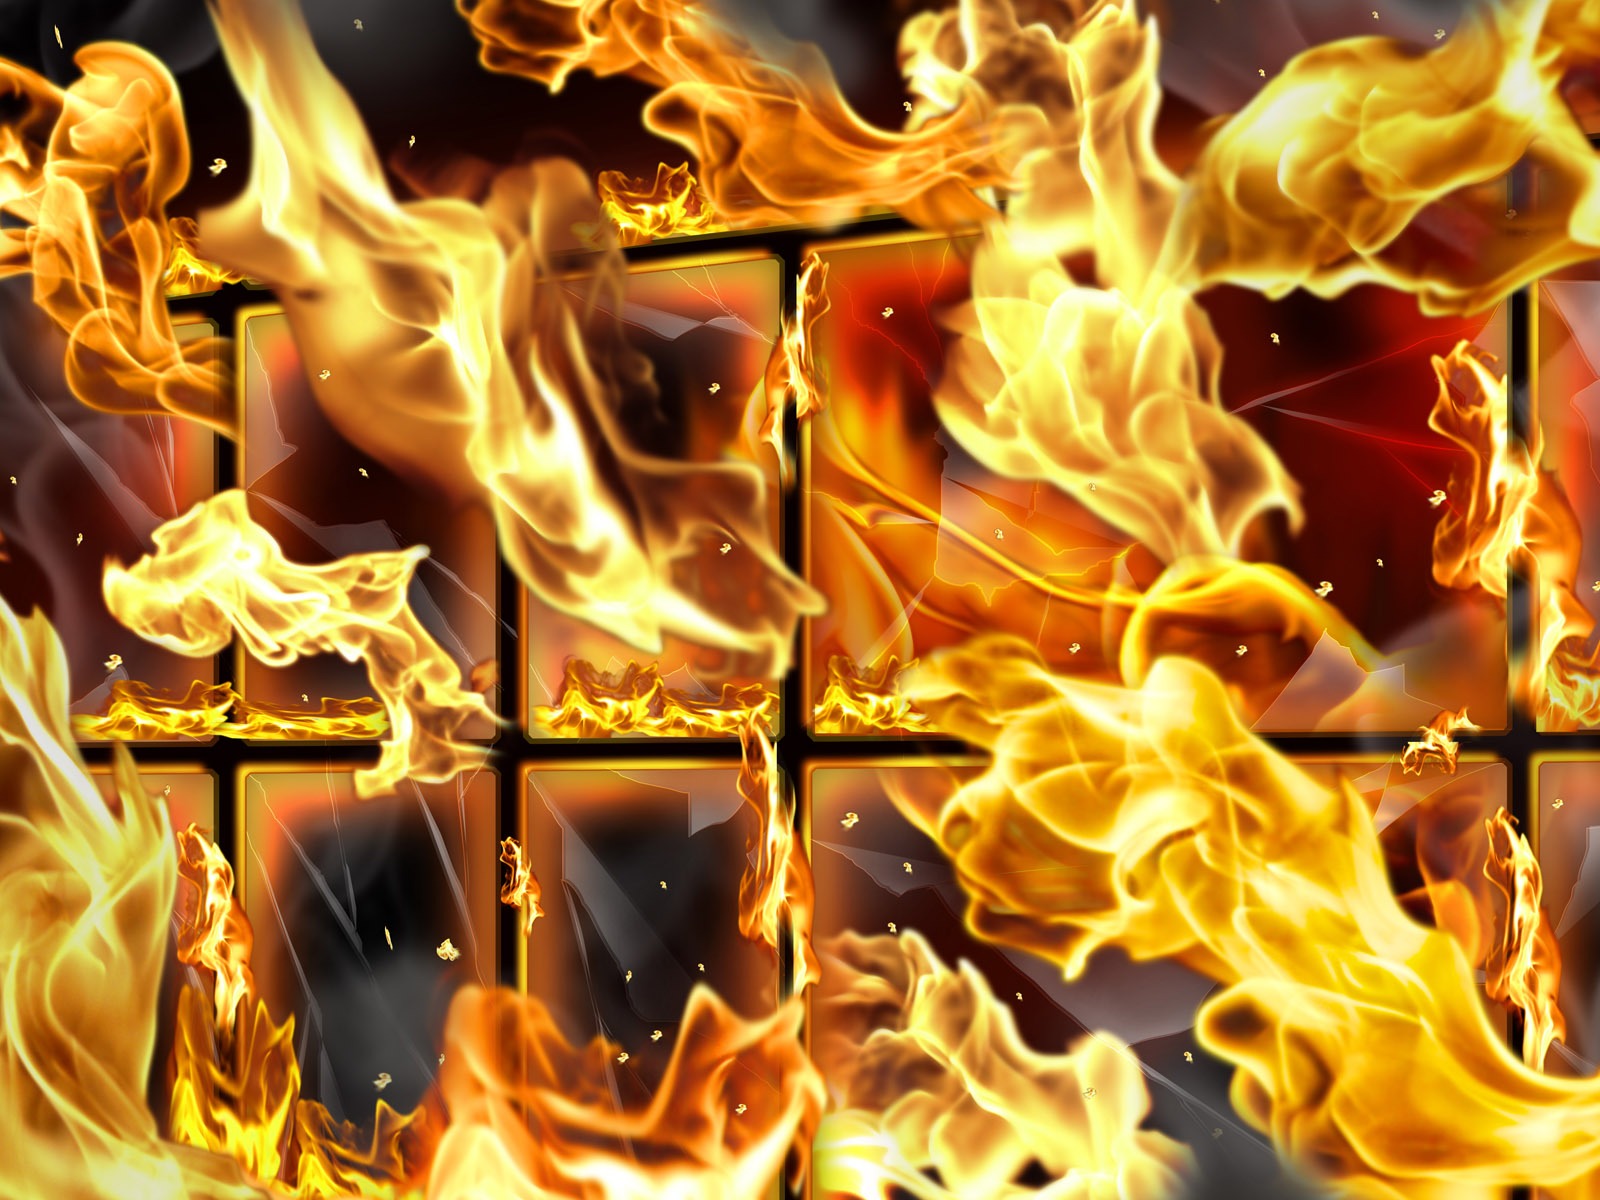 Flame Feature HD Wallpaper #18 - 1600x1200